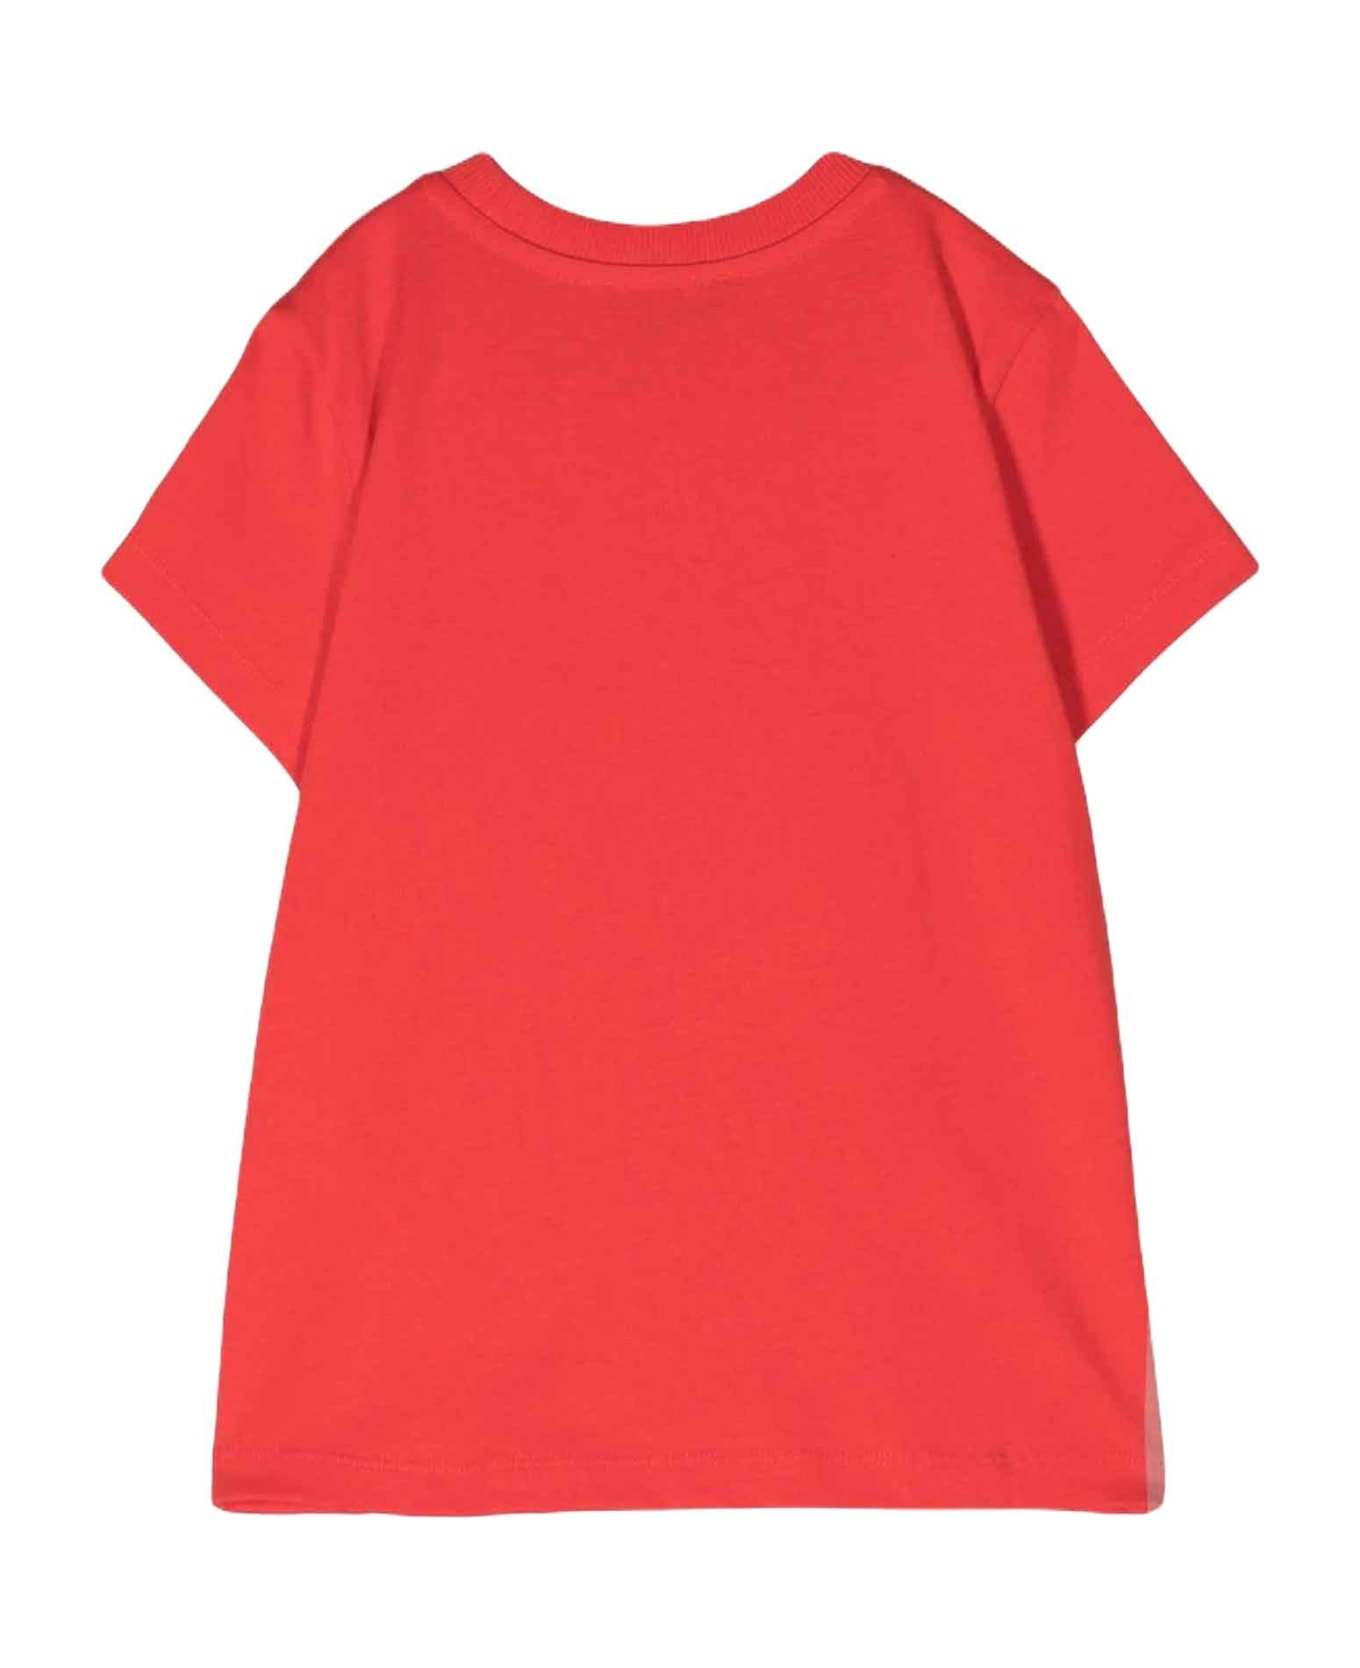 Moschino Red T-shirt Unisex - Rosso